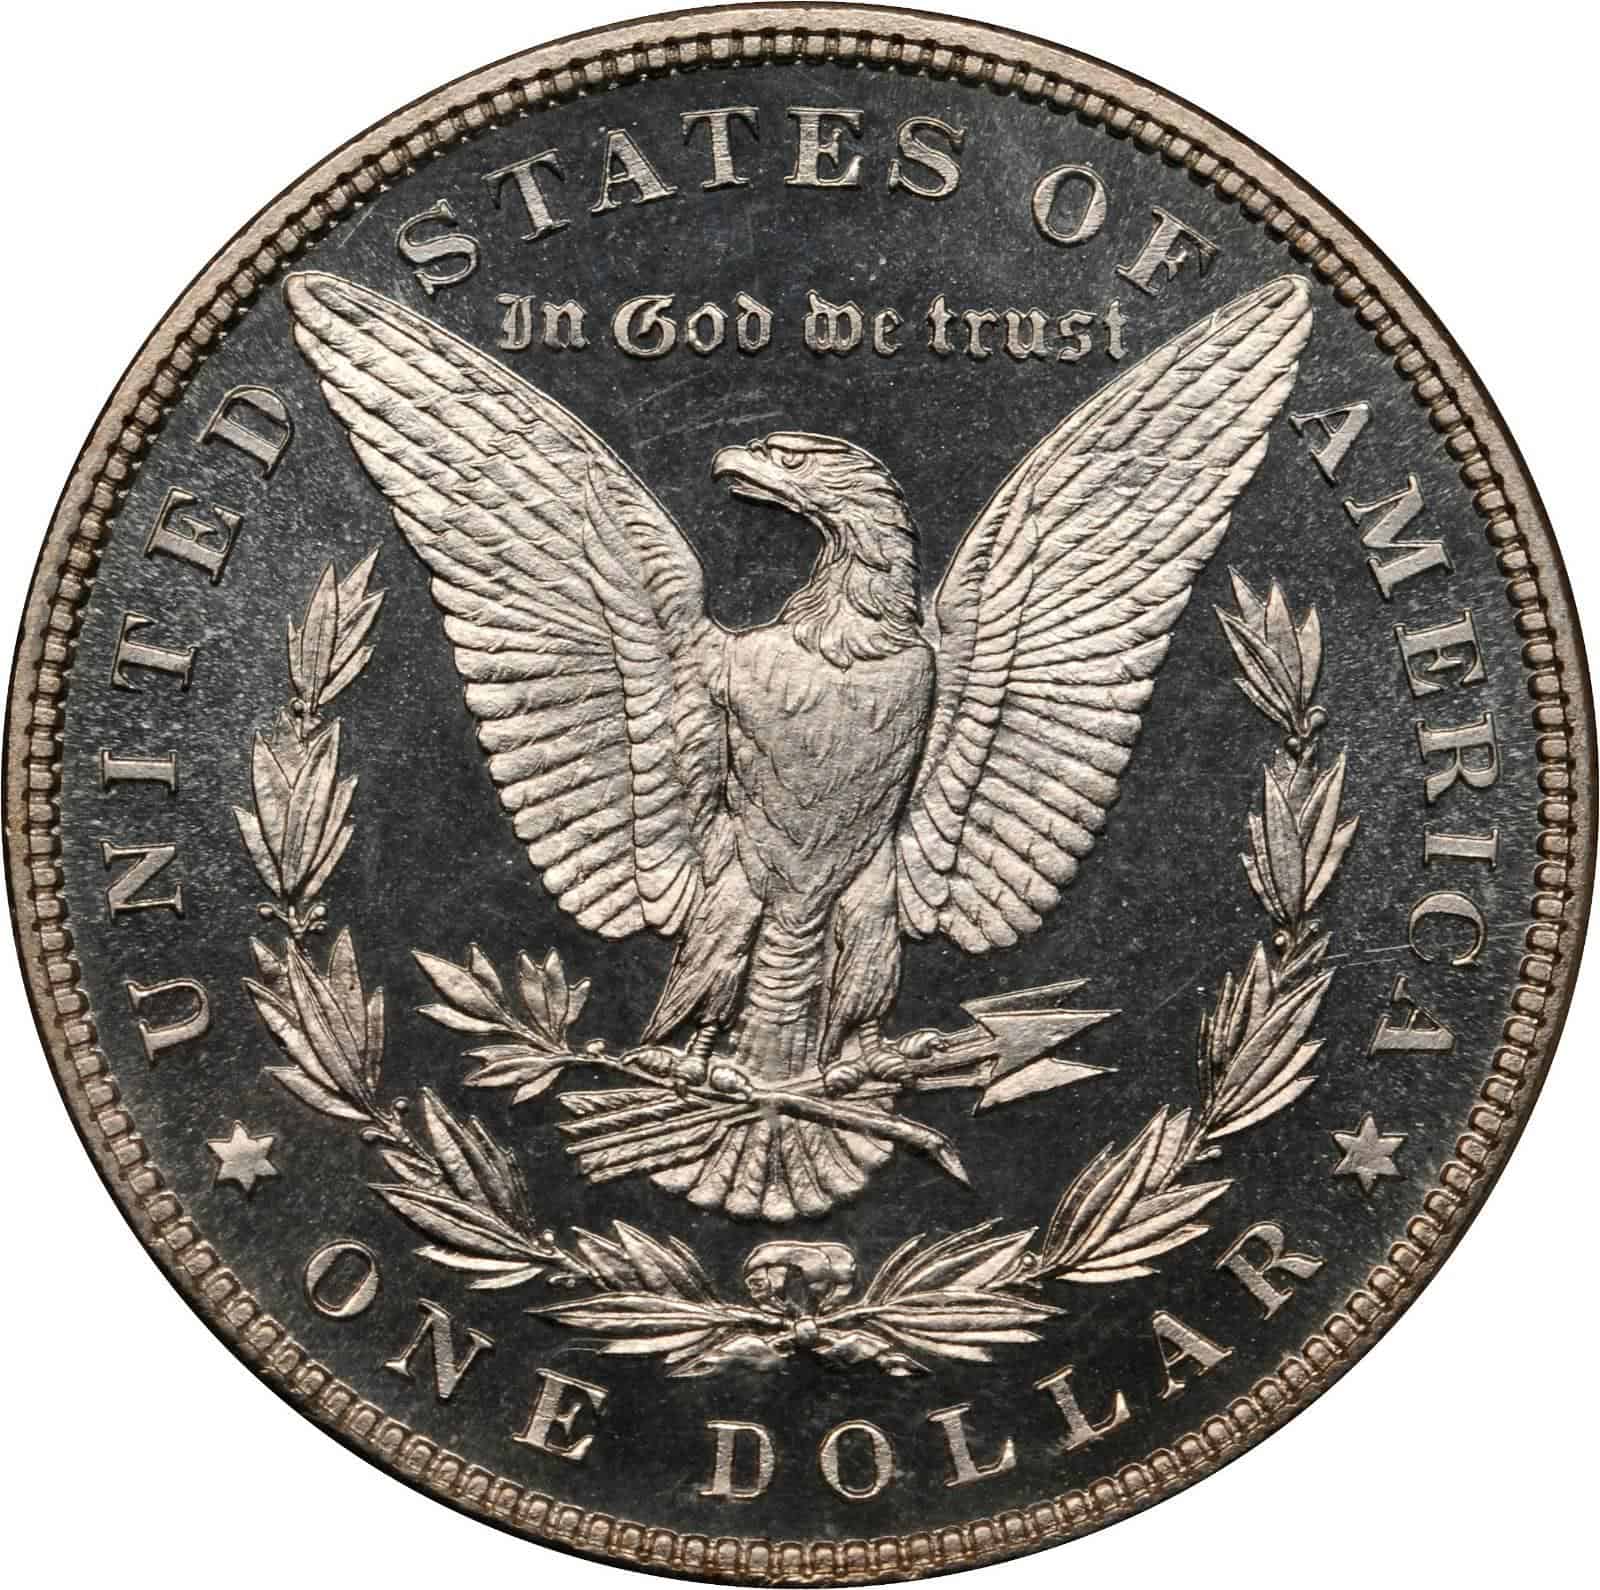 The Reverse of the 1883 Silver Dollar